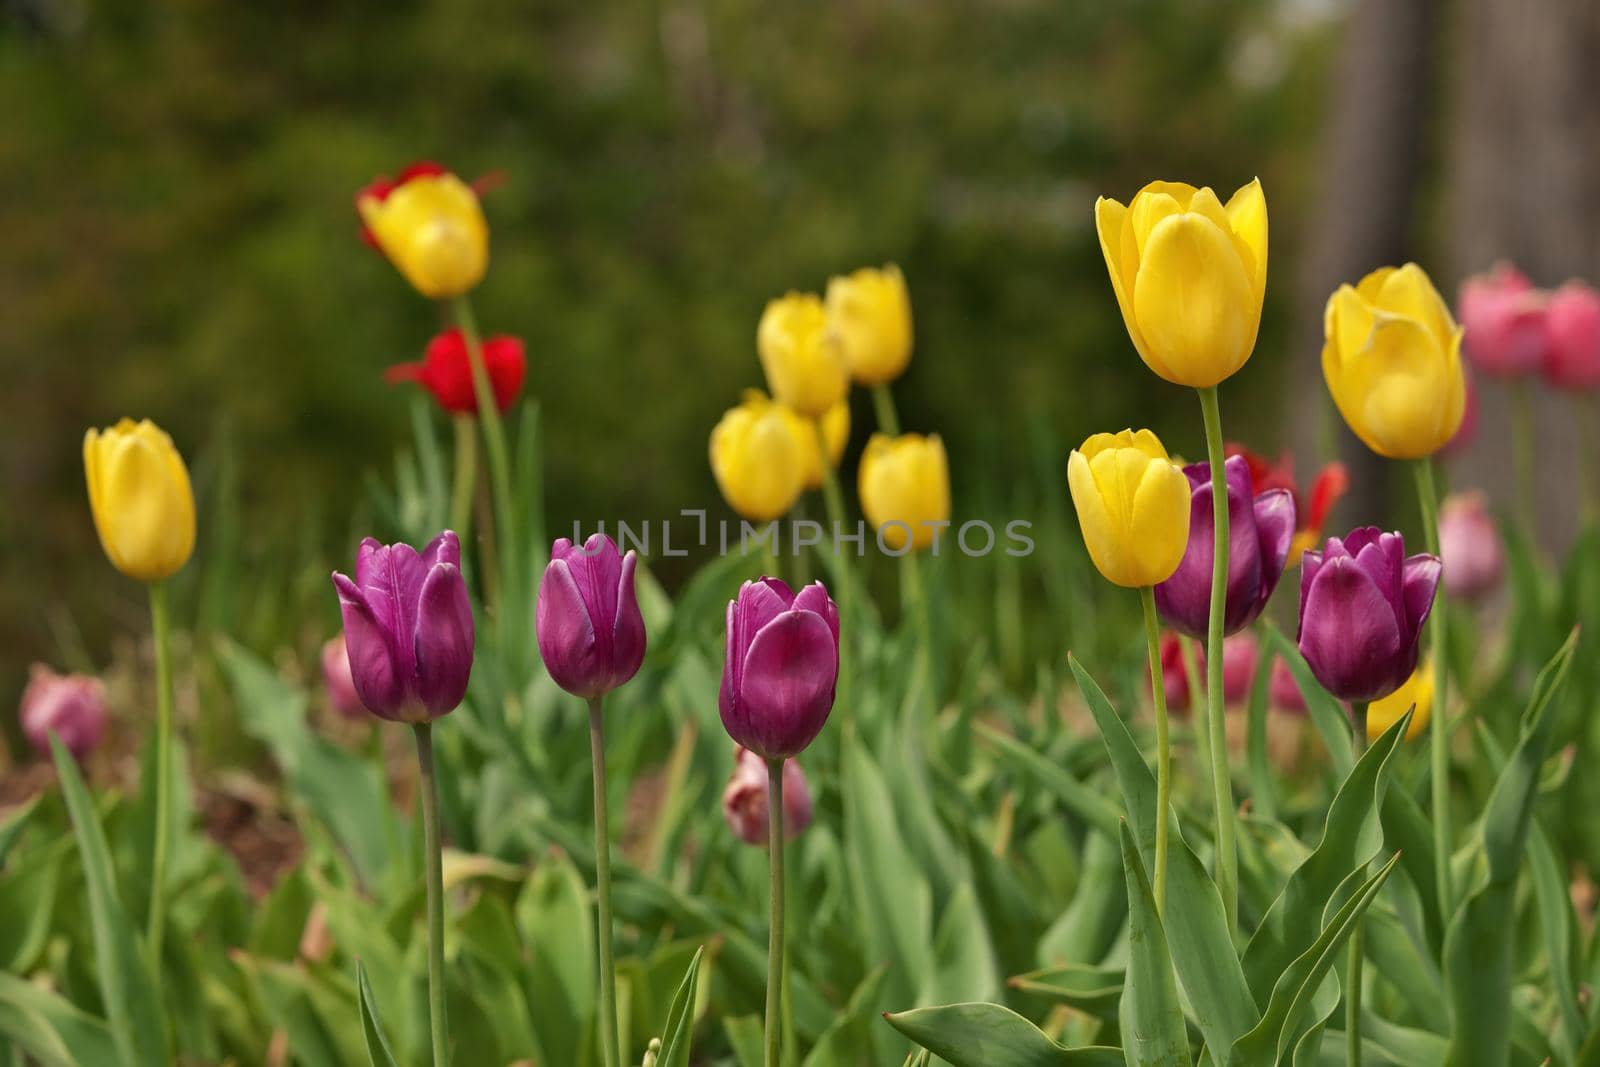 Multi Colored Tulips With Shallow Depth of Field and Creamy Bokeh Background. High quality photo